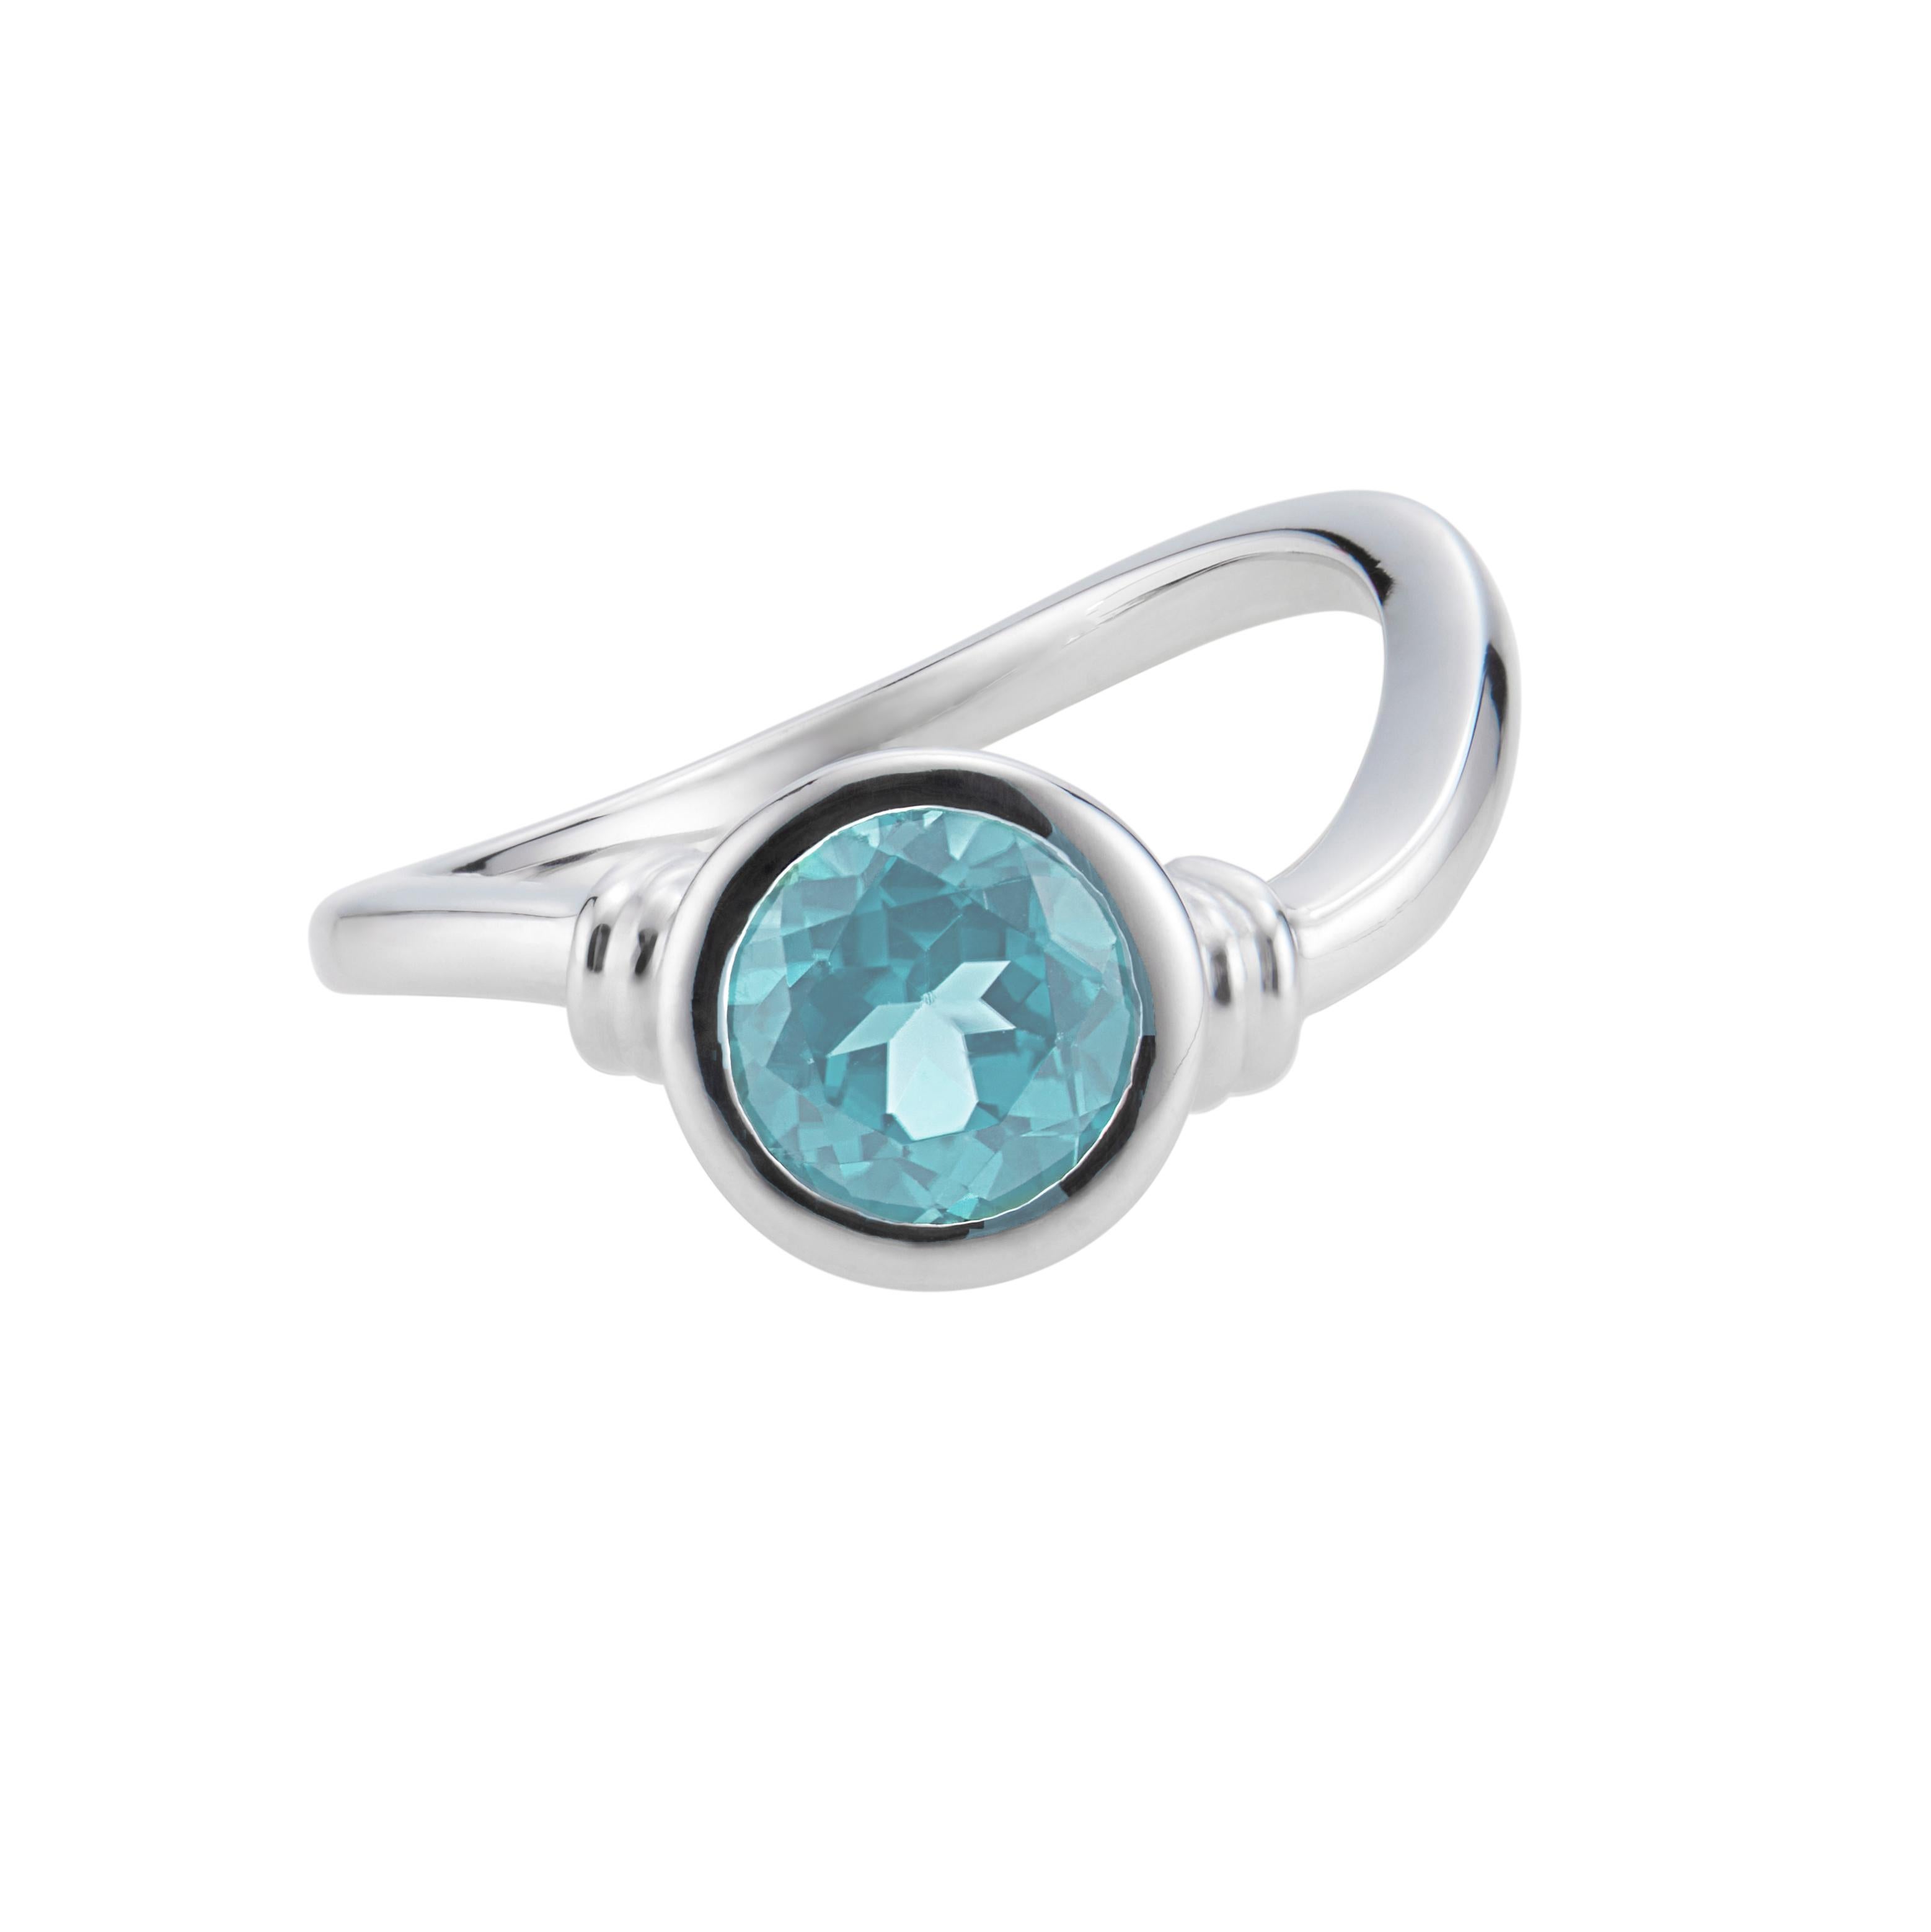 Manfredi of Greenwich, CT, Aquamarine engagement ring. .95ct round aquamarine center in an 18k white gold setting.  

1 round blue aquamarine, MI approx. .95cts
Size 7 and sizable 
18k white gold 
Stamped: 750
Hallmark: Manfredi 
6.3 grams
Width at